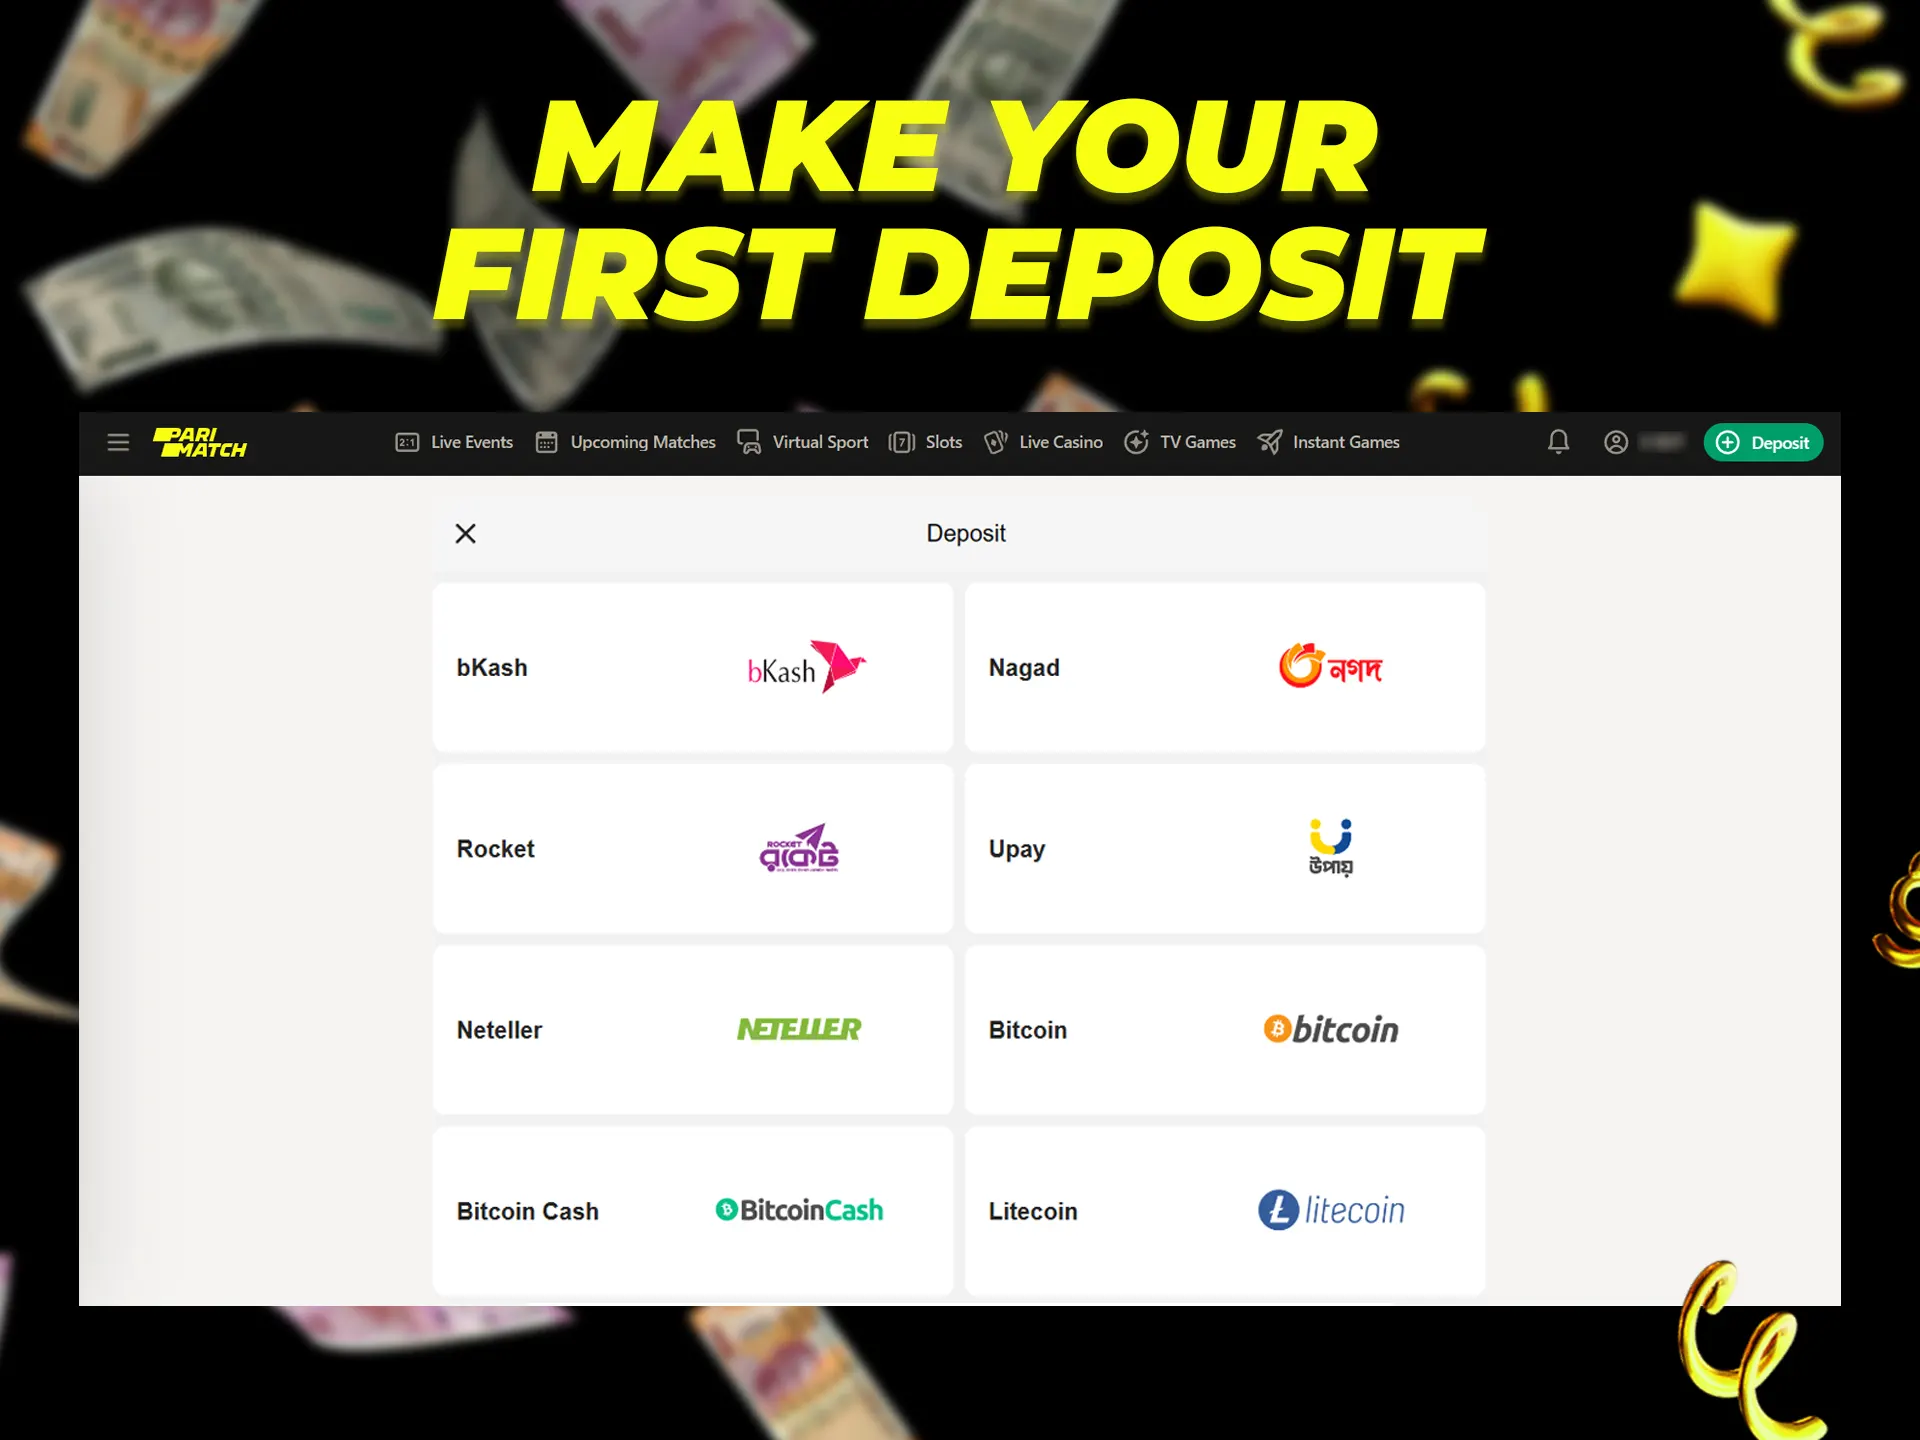 Make your first deposit and choose a convenient payment method.